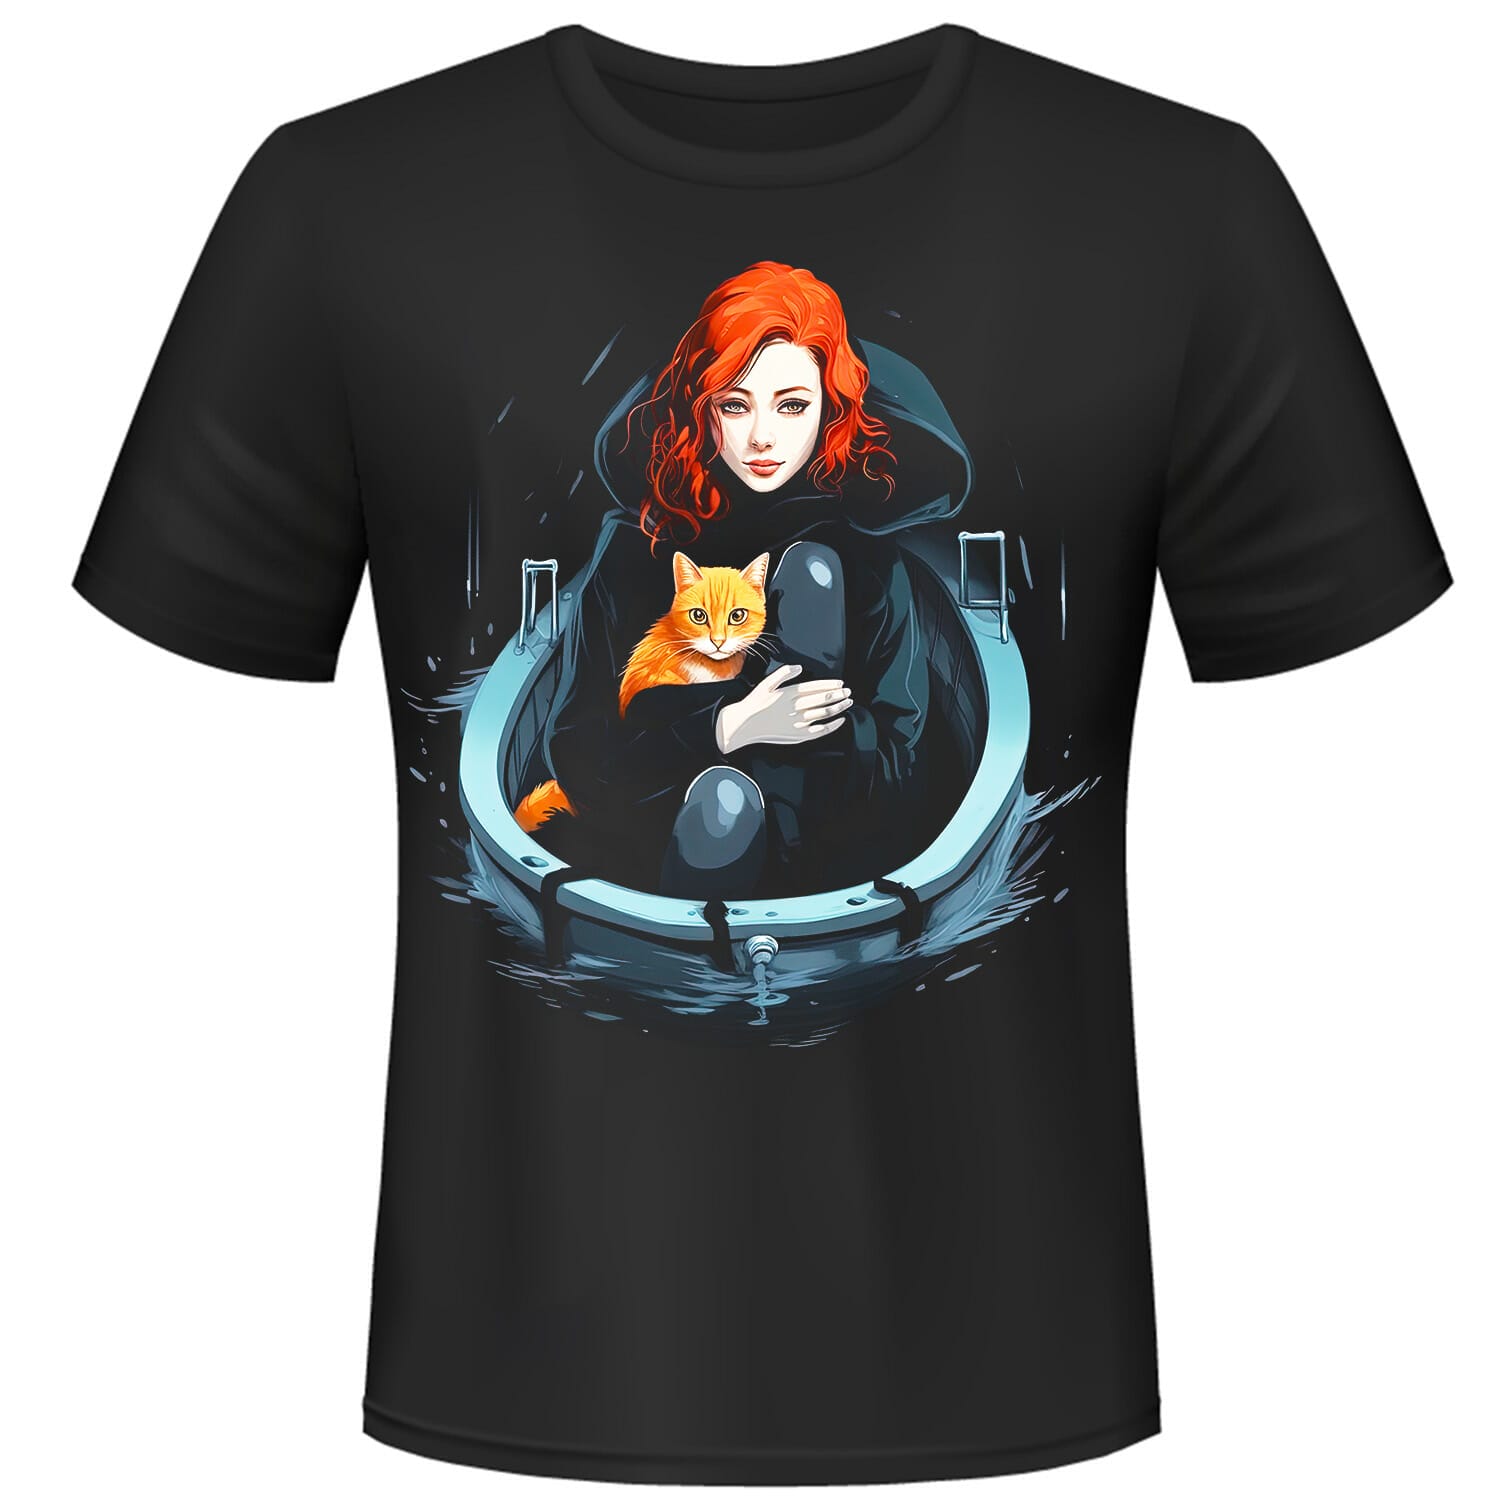 red-haired-girl-with-a-cat-on-a-boat T-shirt Design